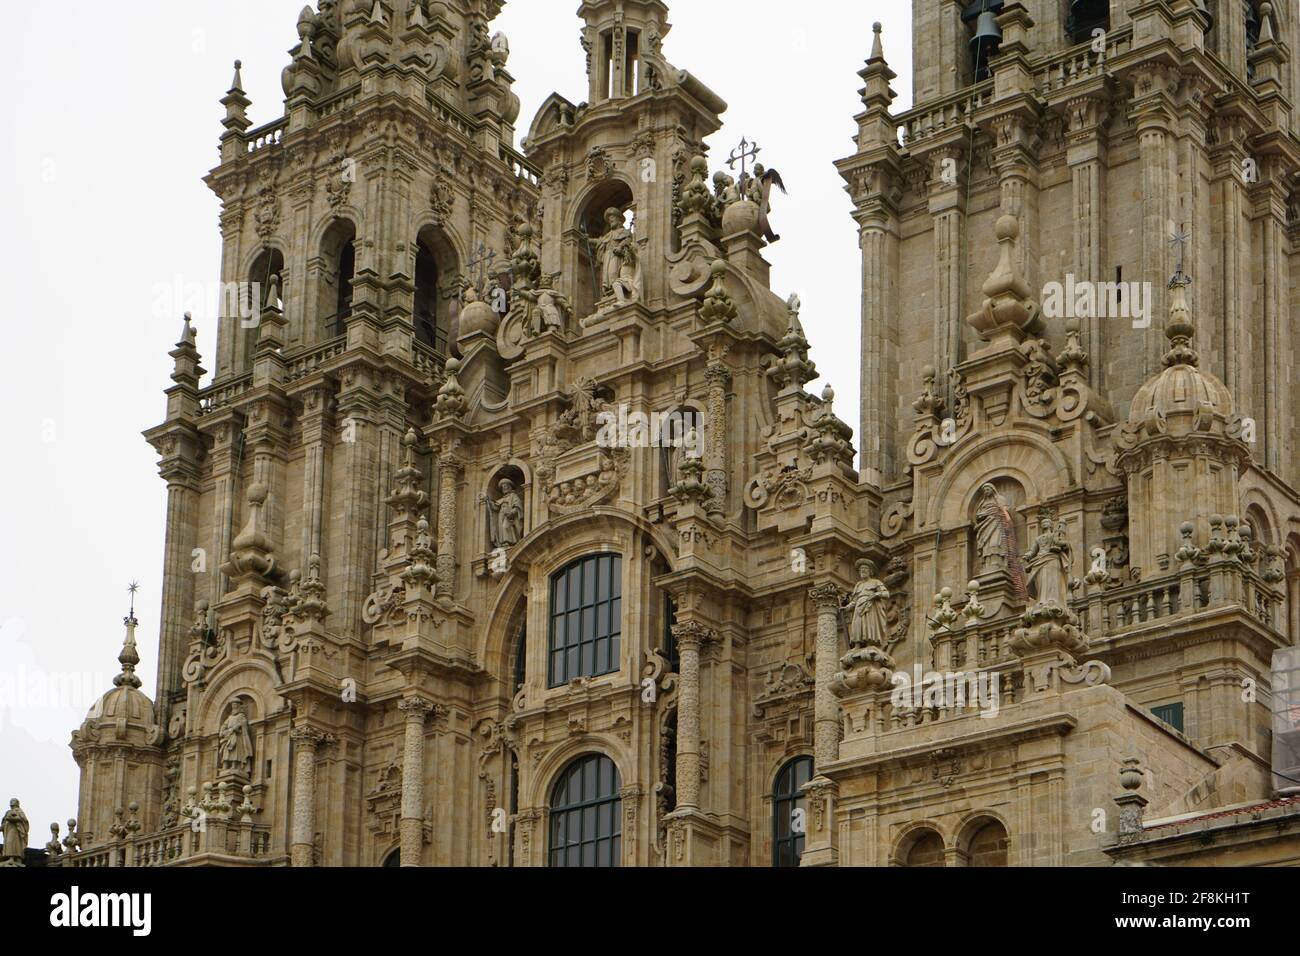 santiago de compostela: relief on the main entrance of the nuns' monastery besides the santiago cathedral with St. James on top, Oktober 2020 Stock Photo